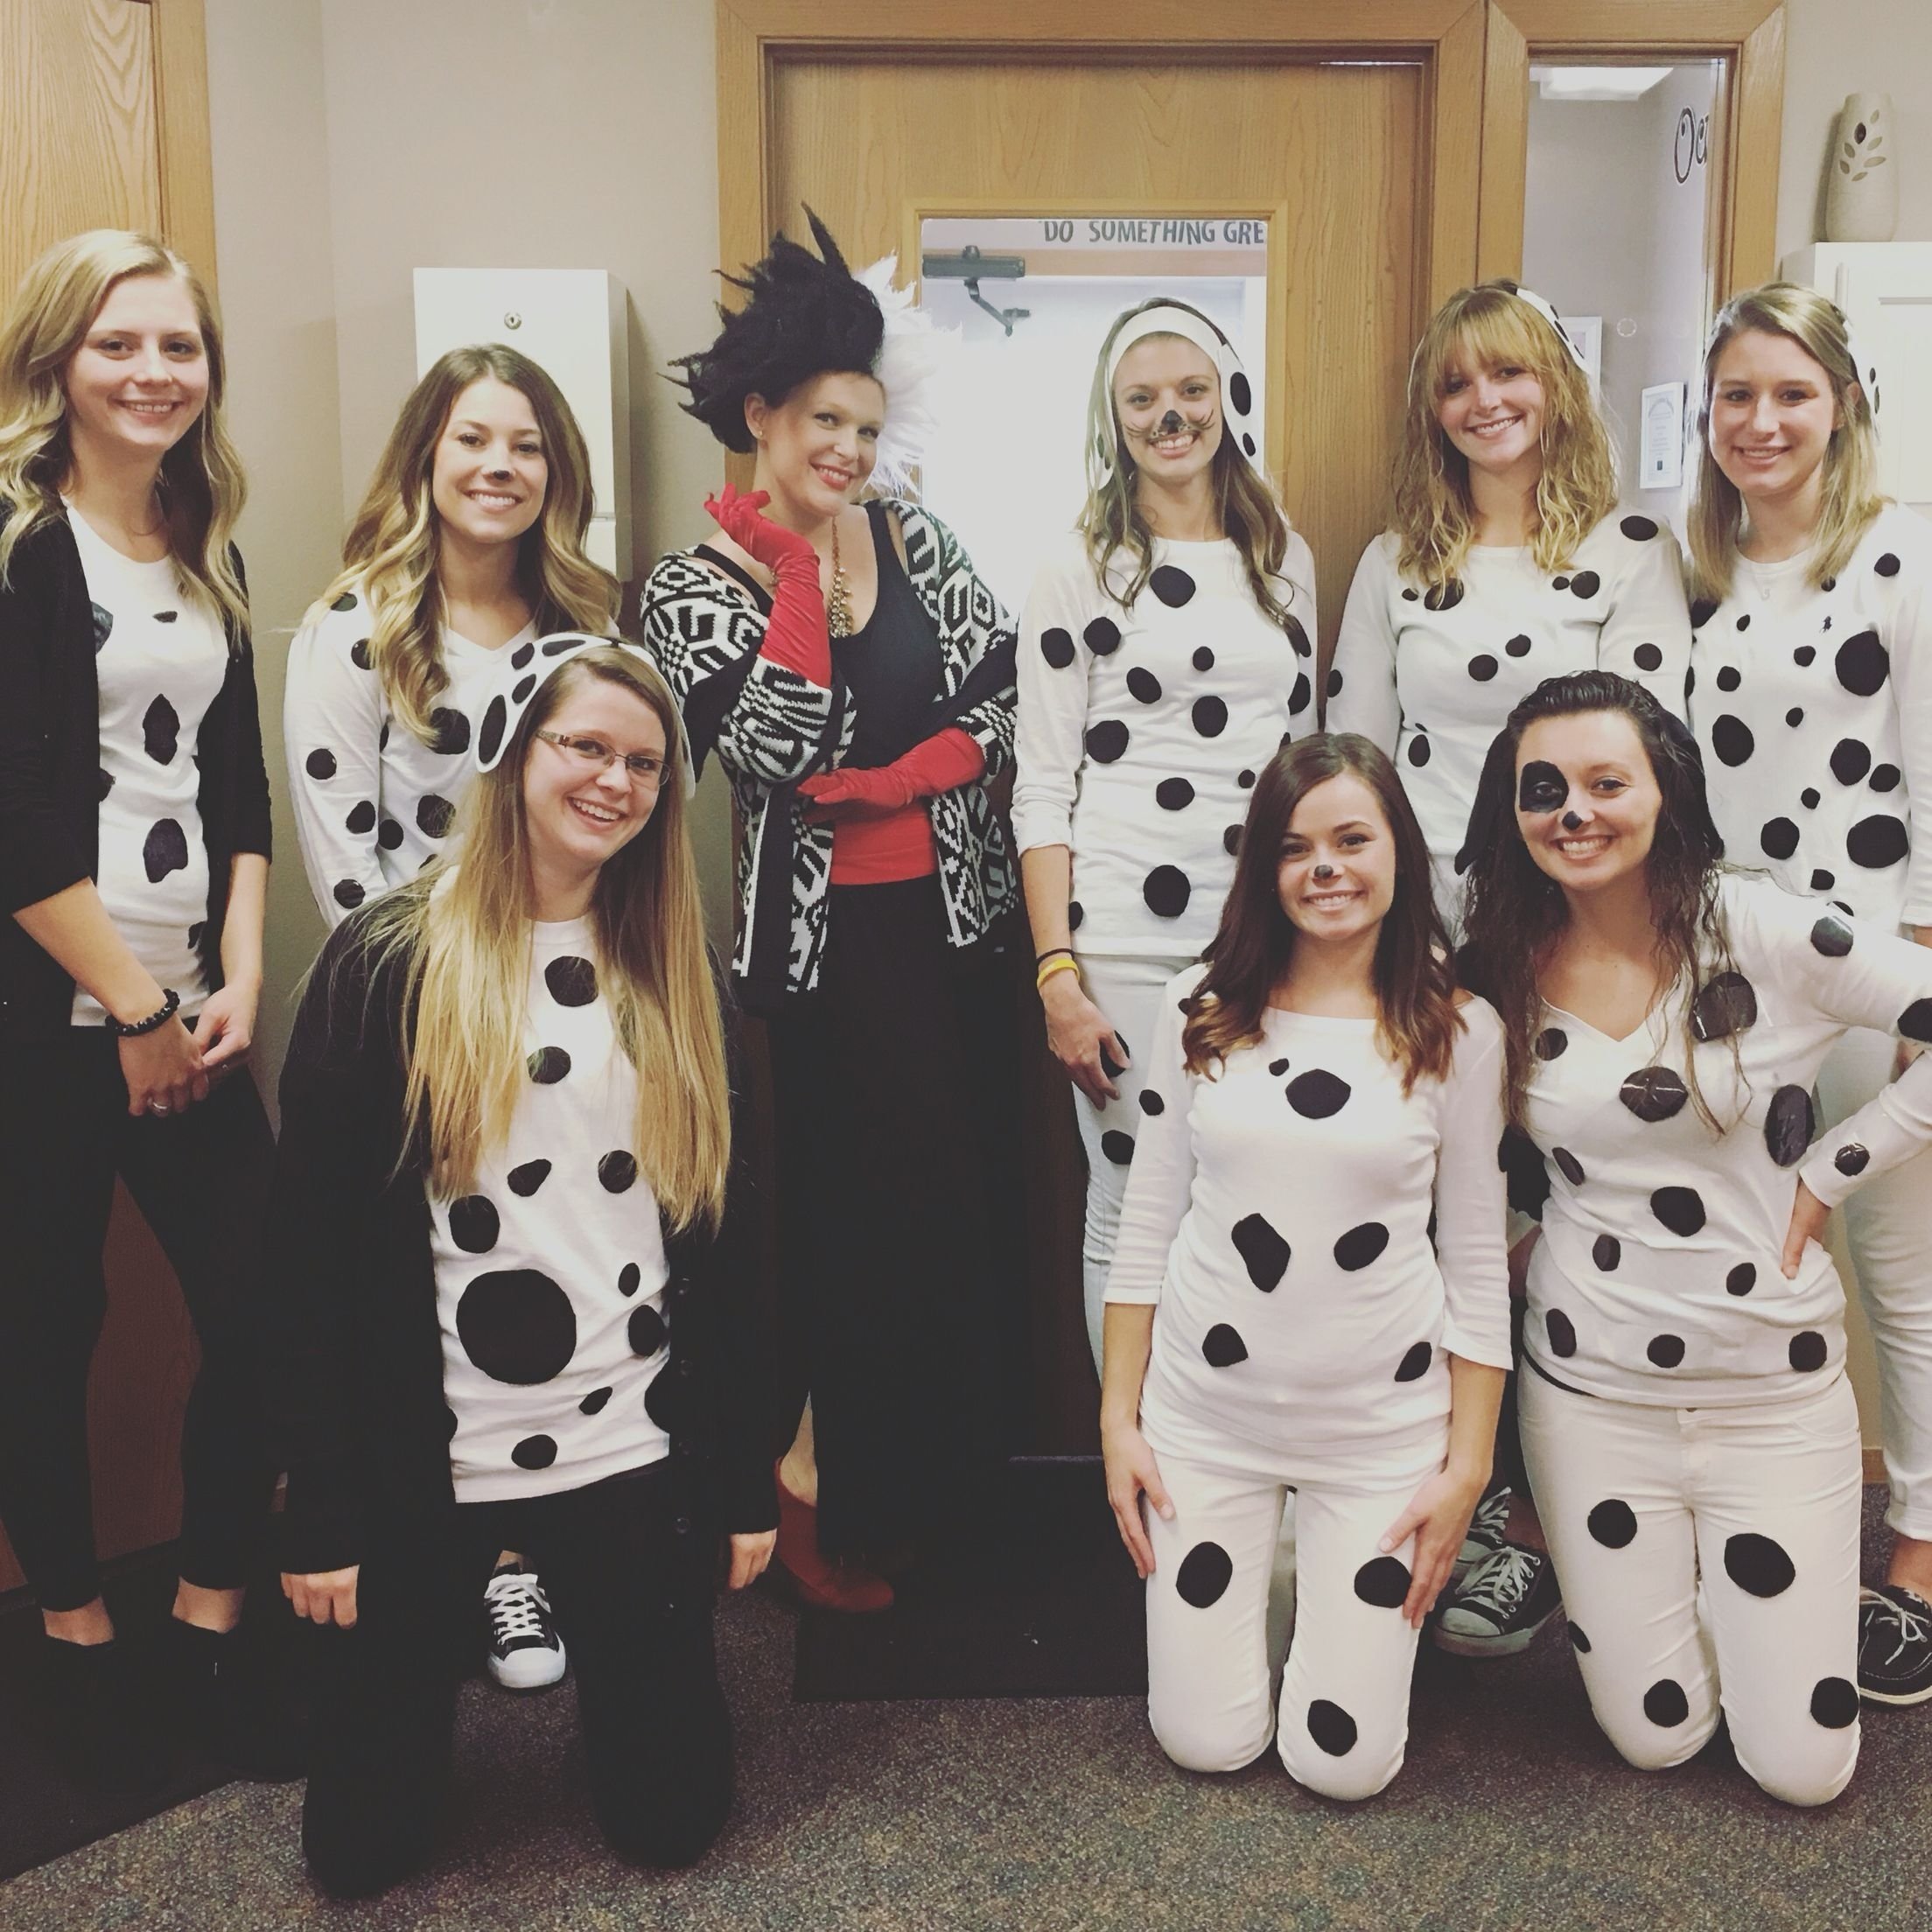 10 Best Group Halloween Costume Ideas For Work 101 dalmation group costume holidays events pinterest 2021